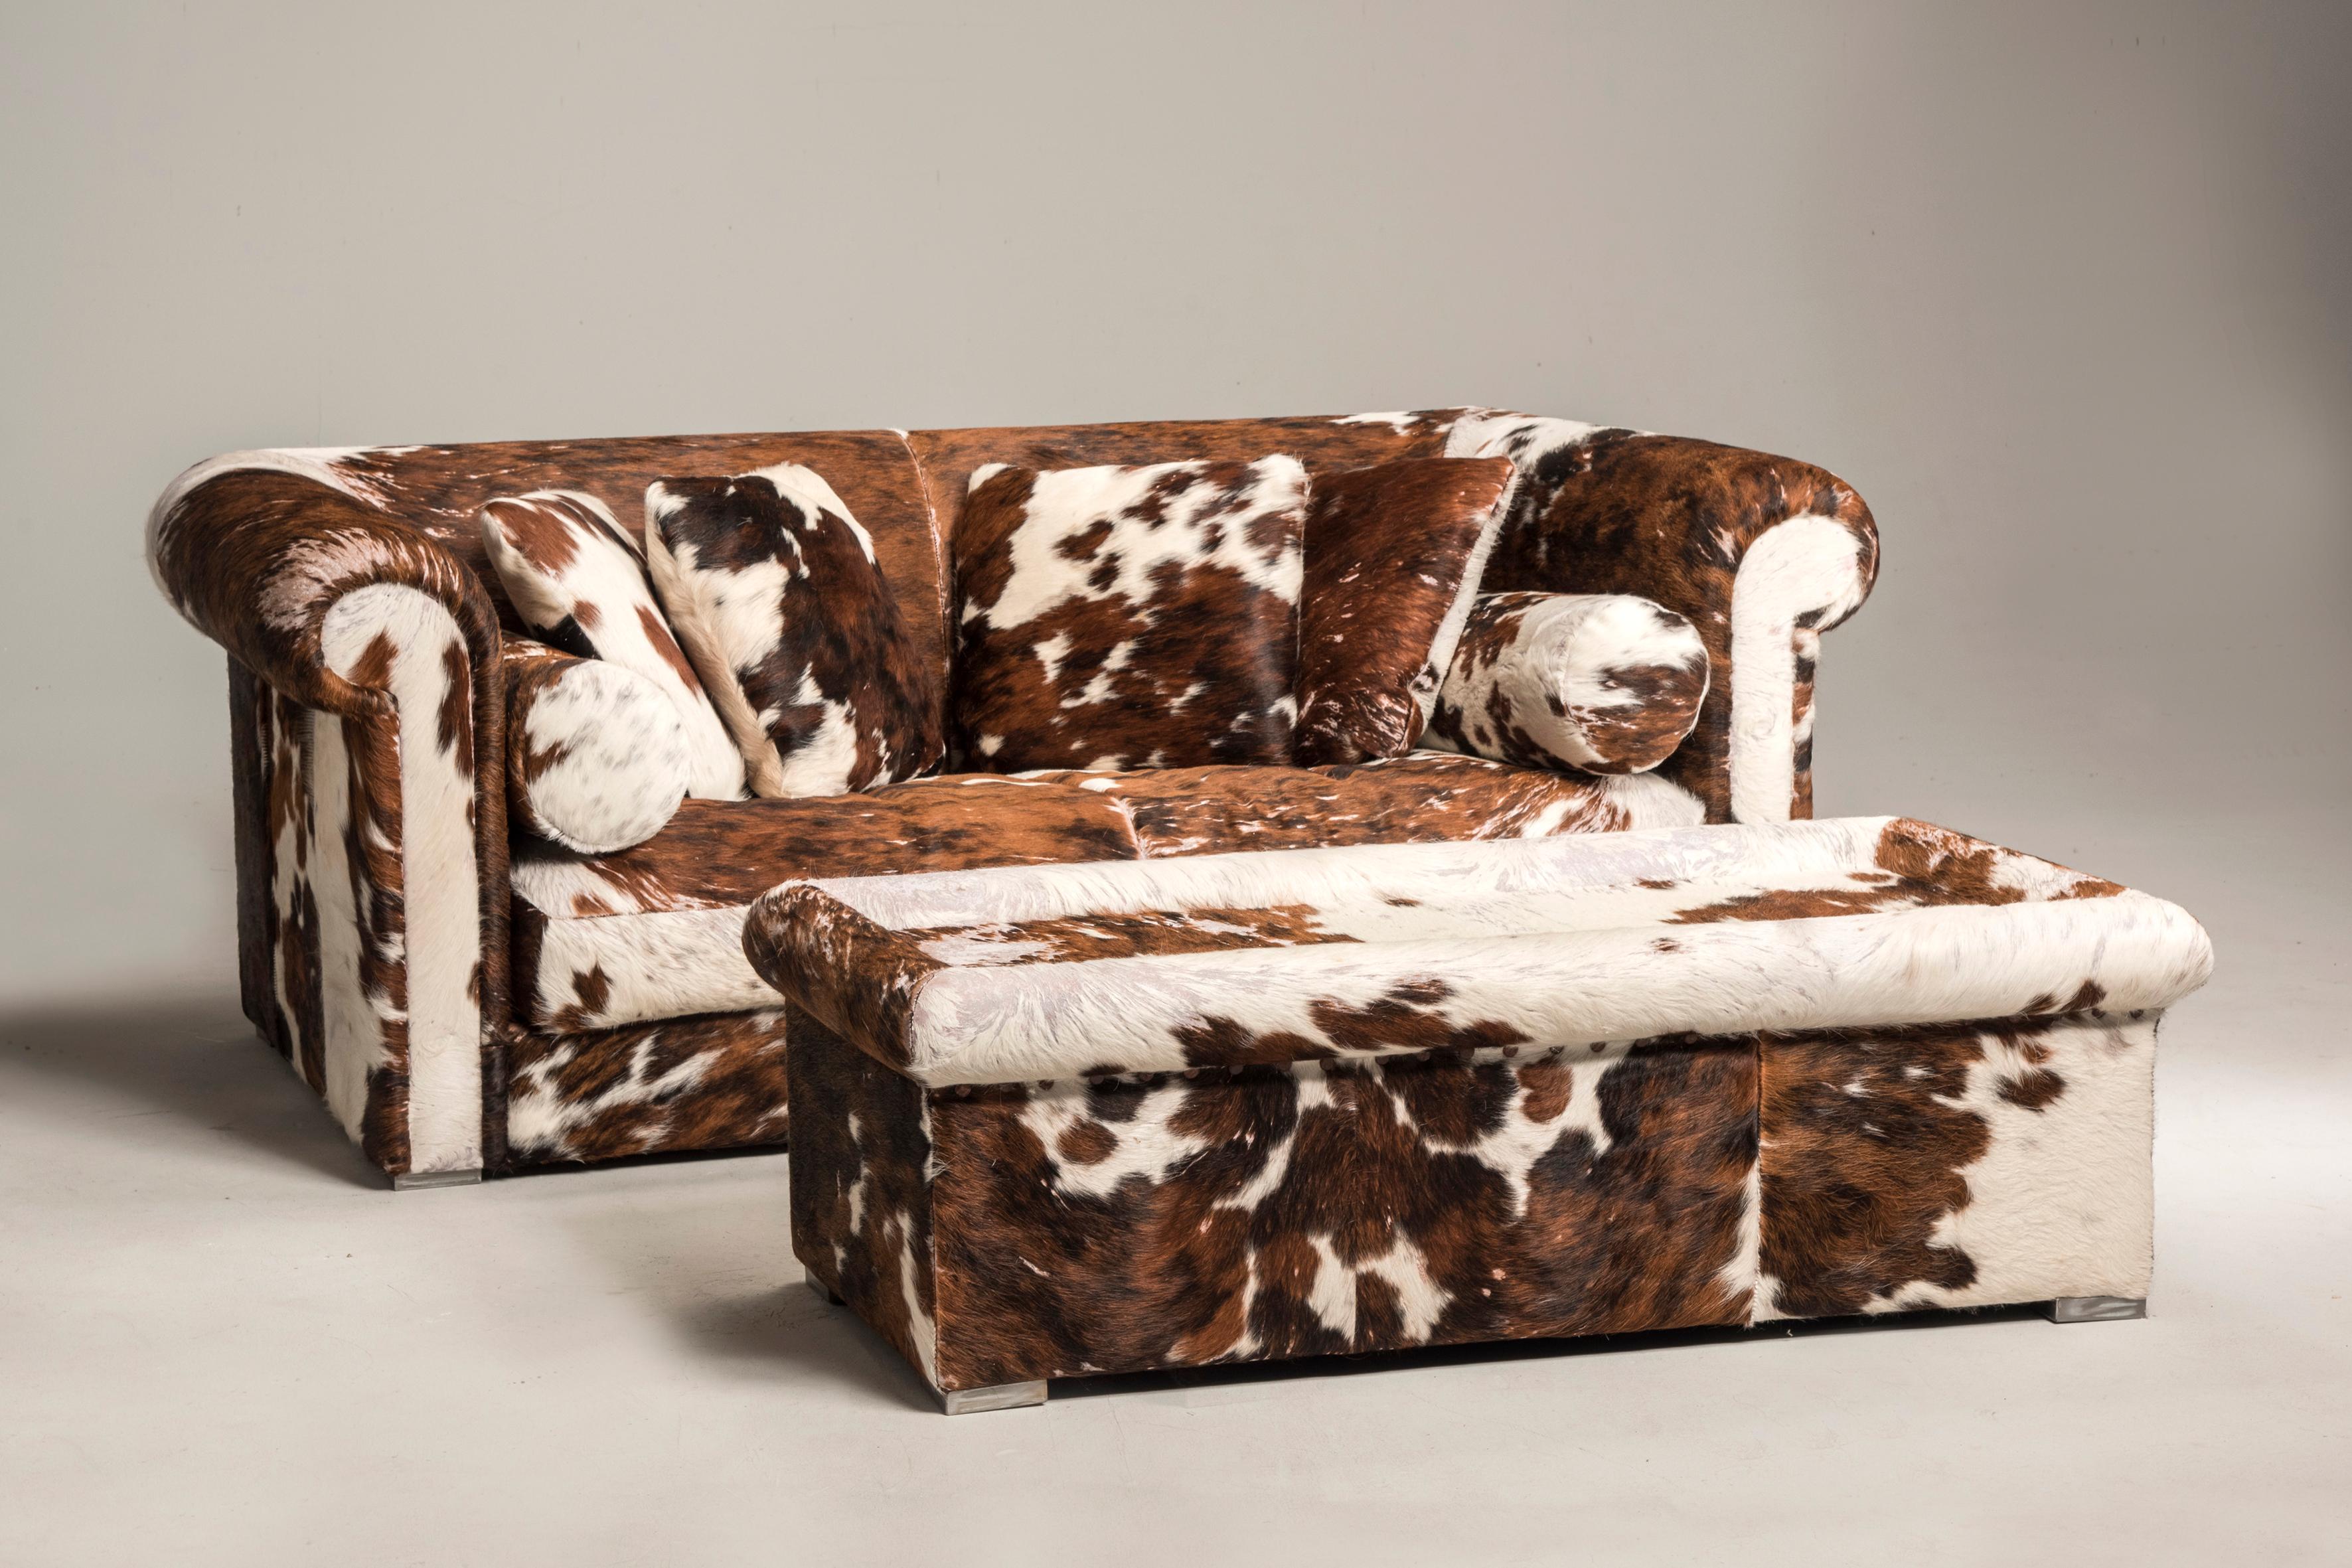 European Baxter Brown and White Cow Fur Leather Sofa with Pillows, Italy, 1990s For Sale